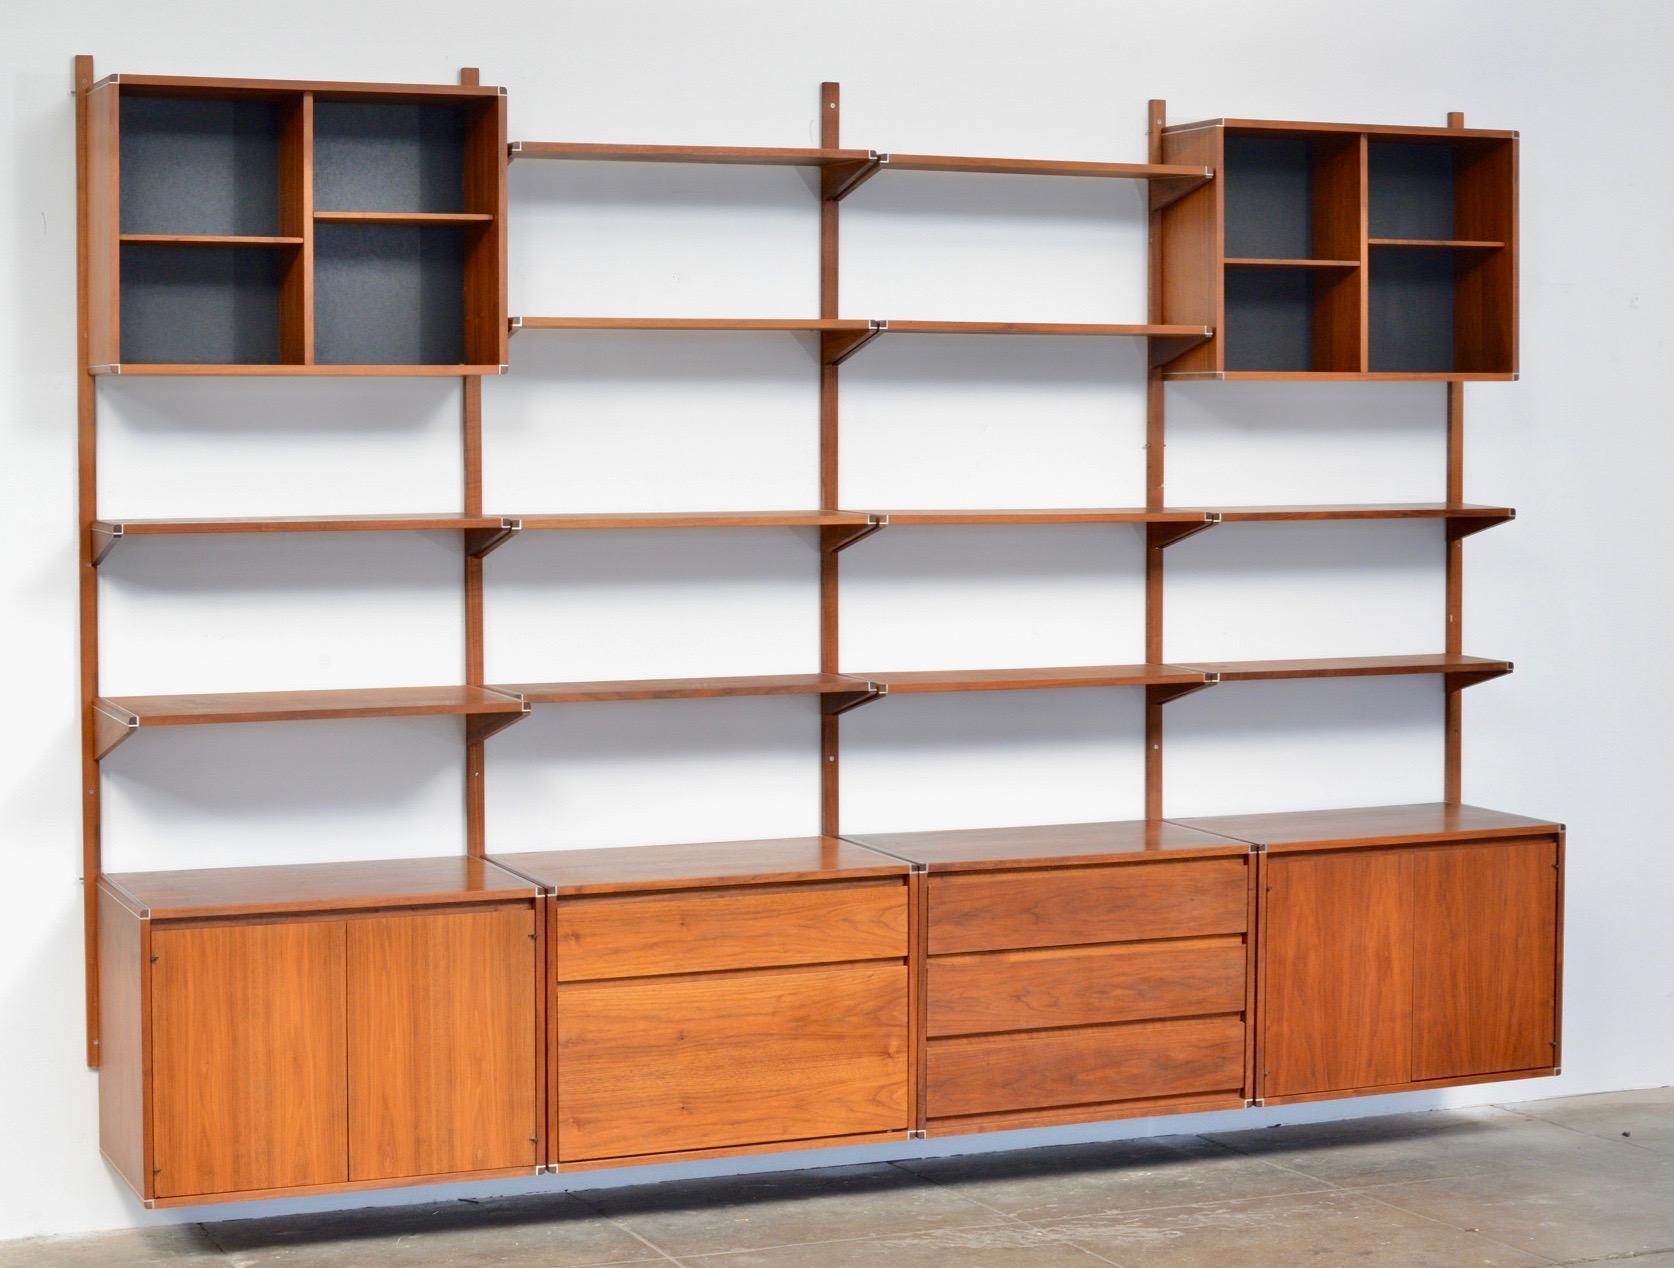 This is a four bay Barzilay wall unit by Gerald McCabe of Los Angeles. Oiled walnut with aluminum detail in great condition. We have a variety of cabinets, shelves, and desk components, you can customize your order depending on configuration